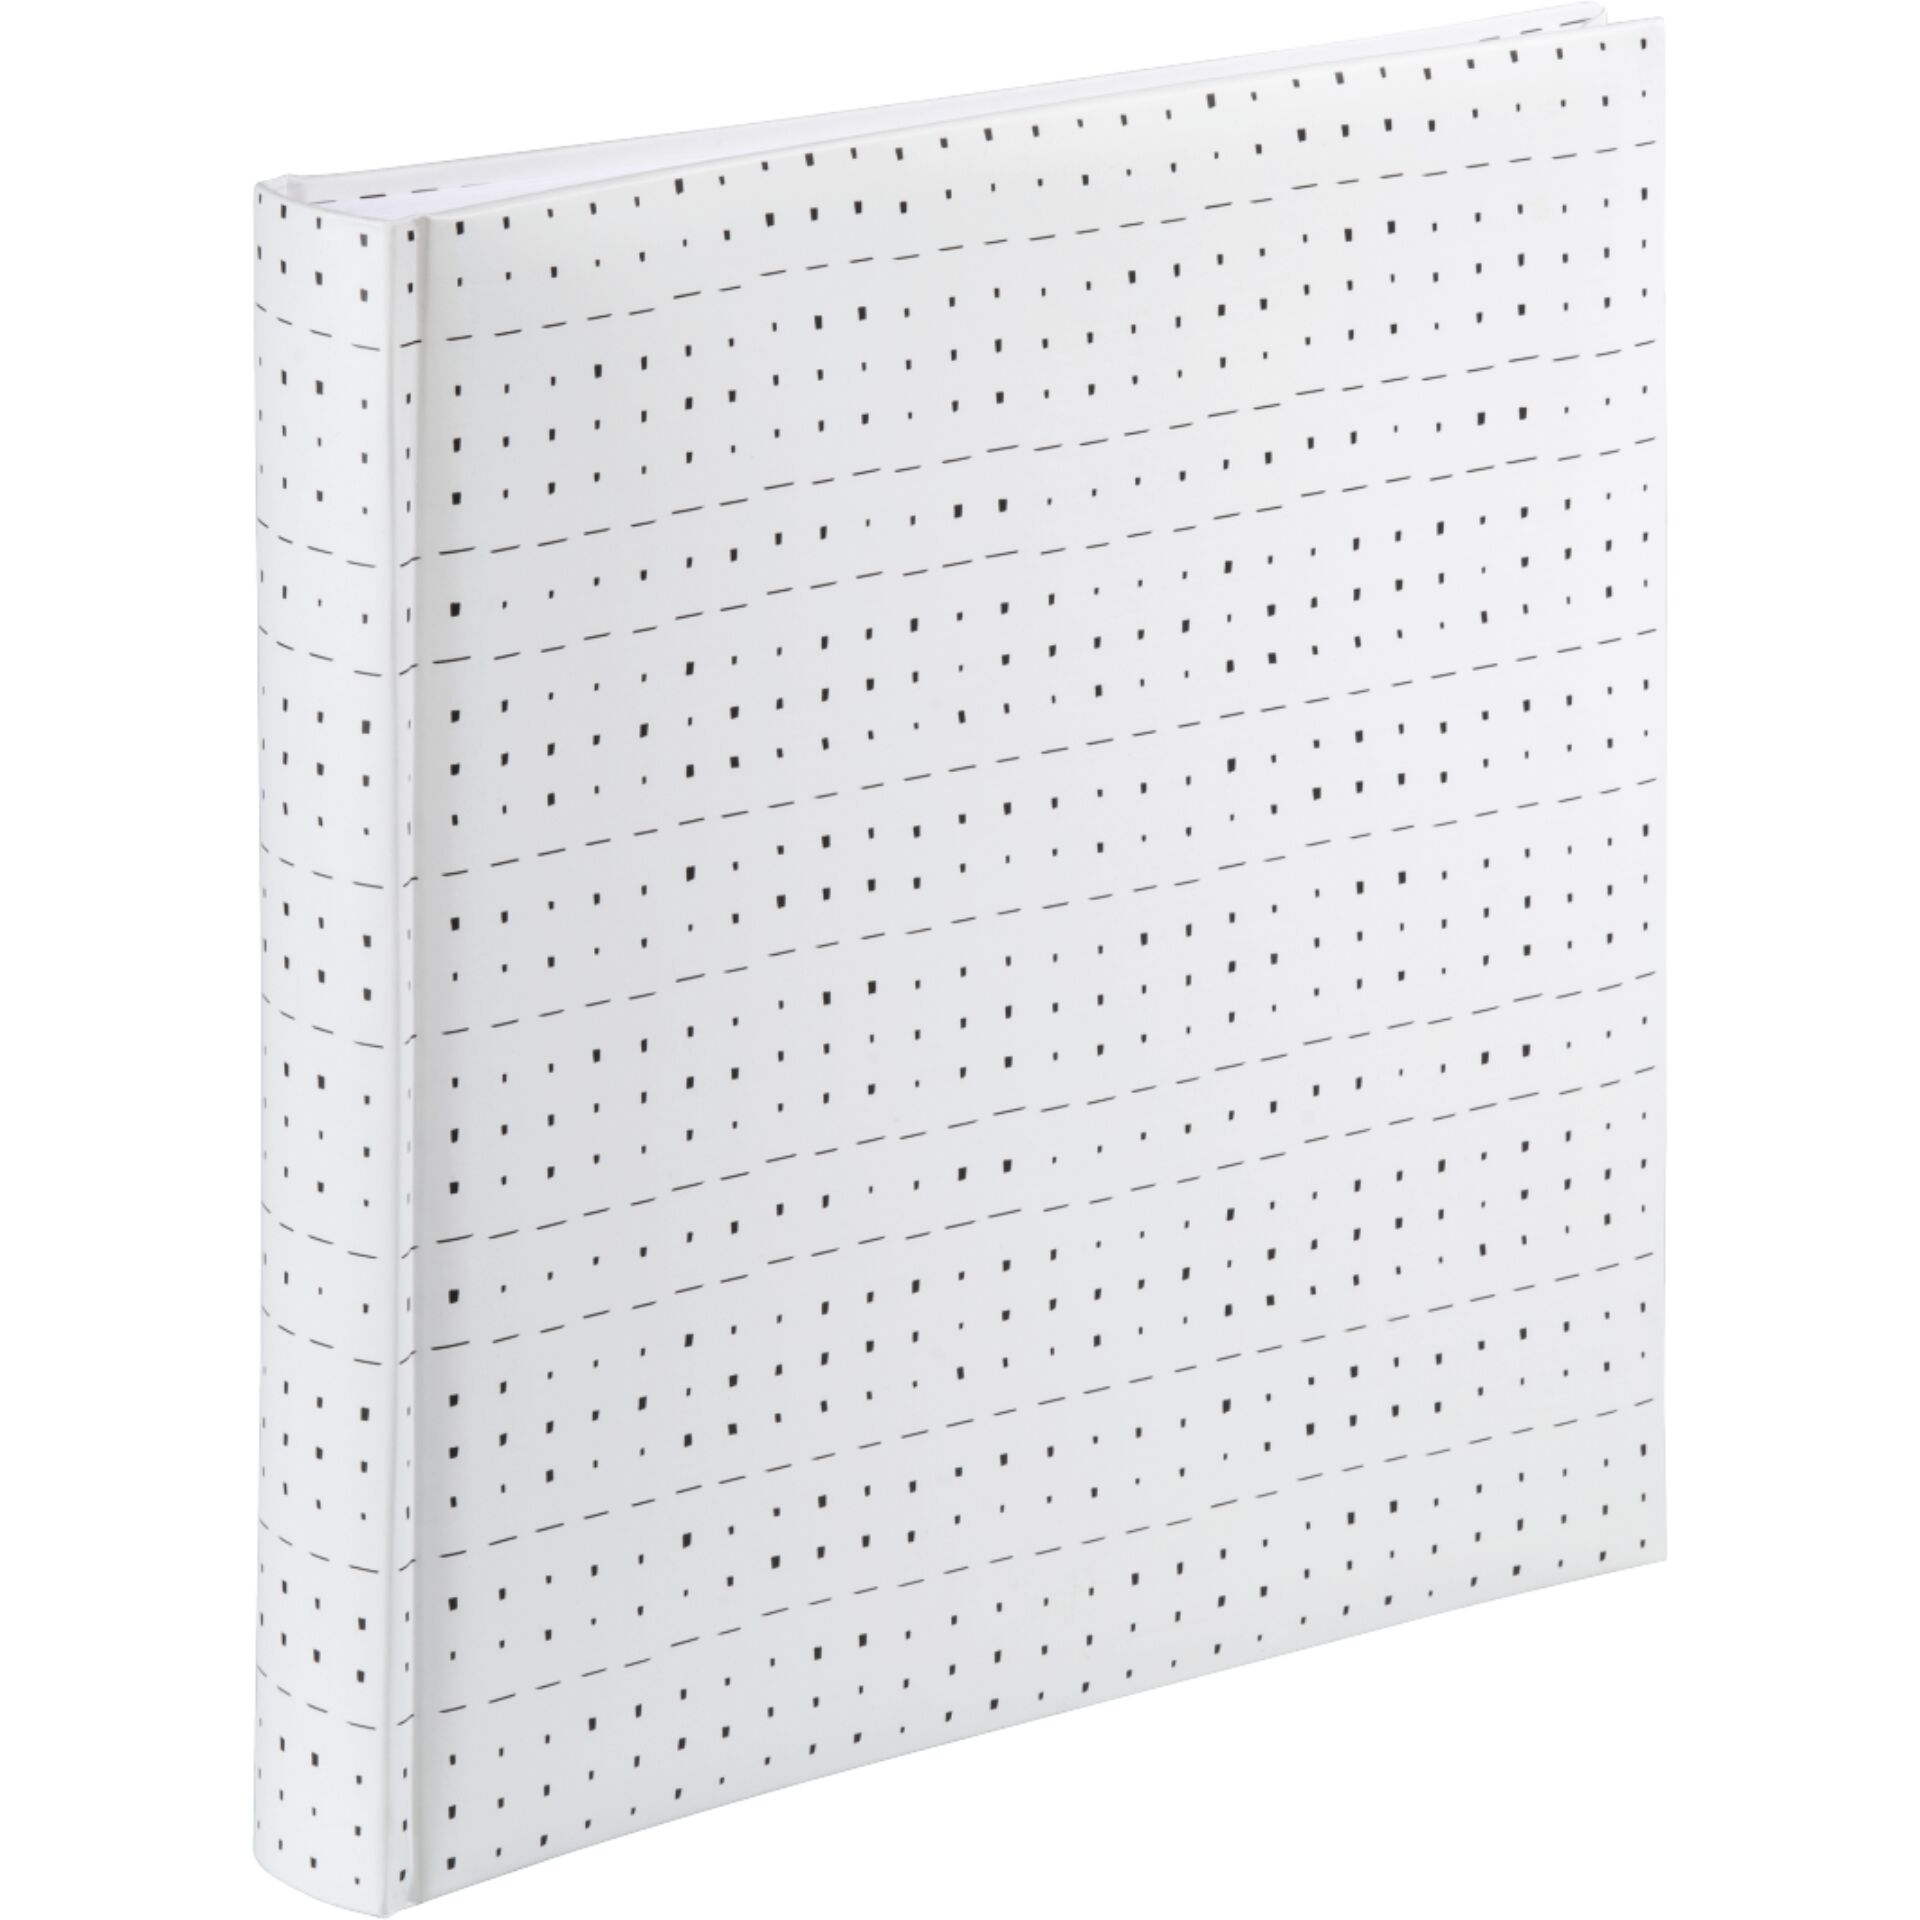 Hama Jumbo Graphic Squares 30x30 - 80 white Pages